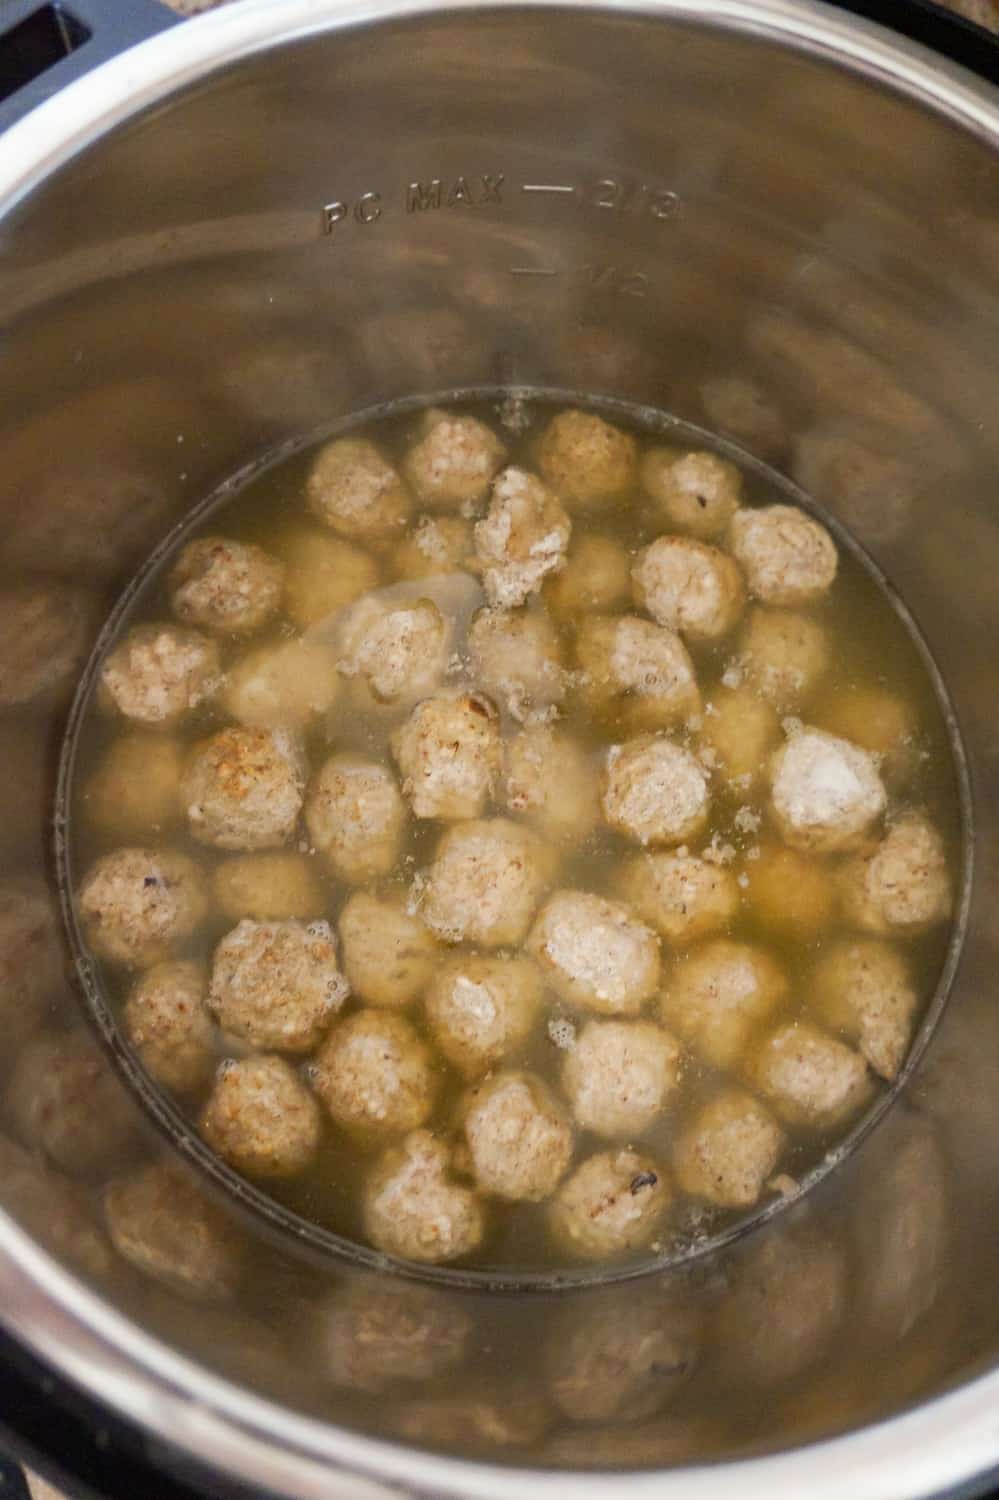 meatballs in water and broth in an Instant Pot